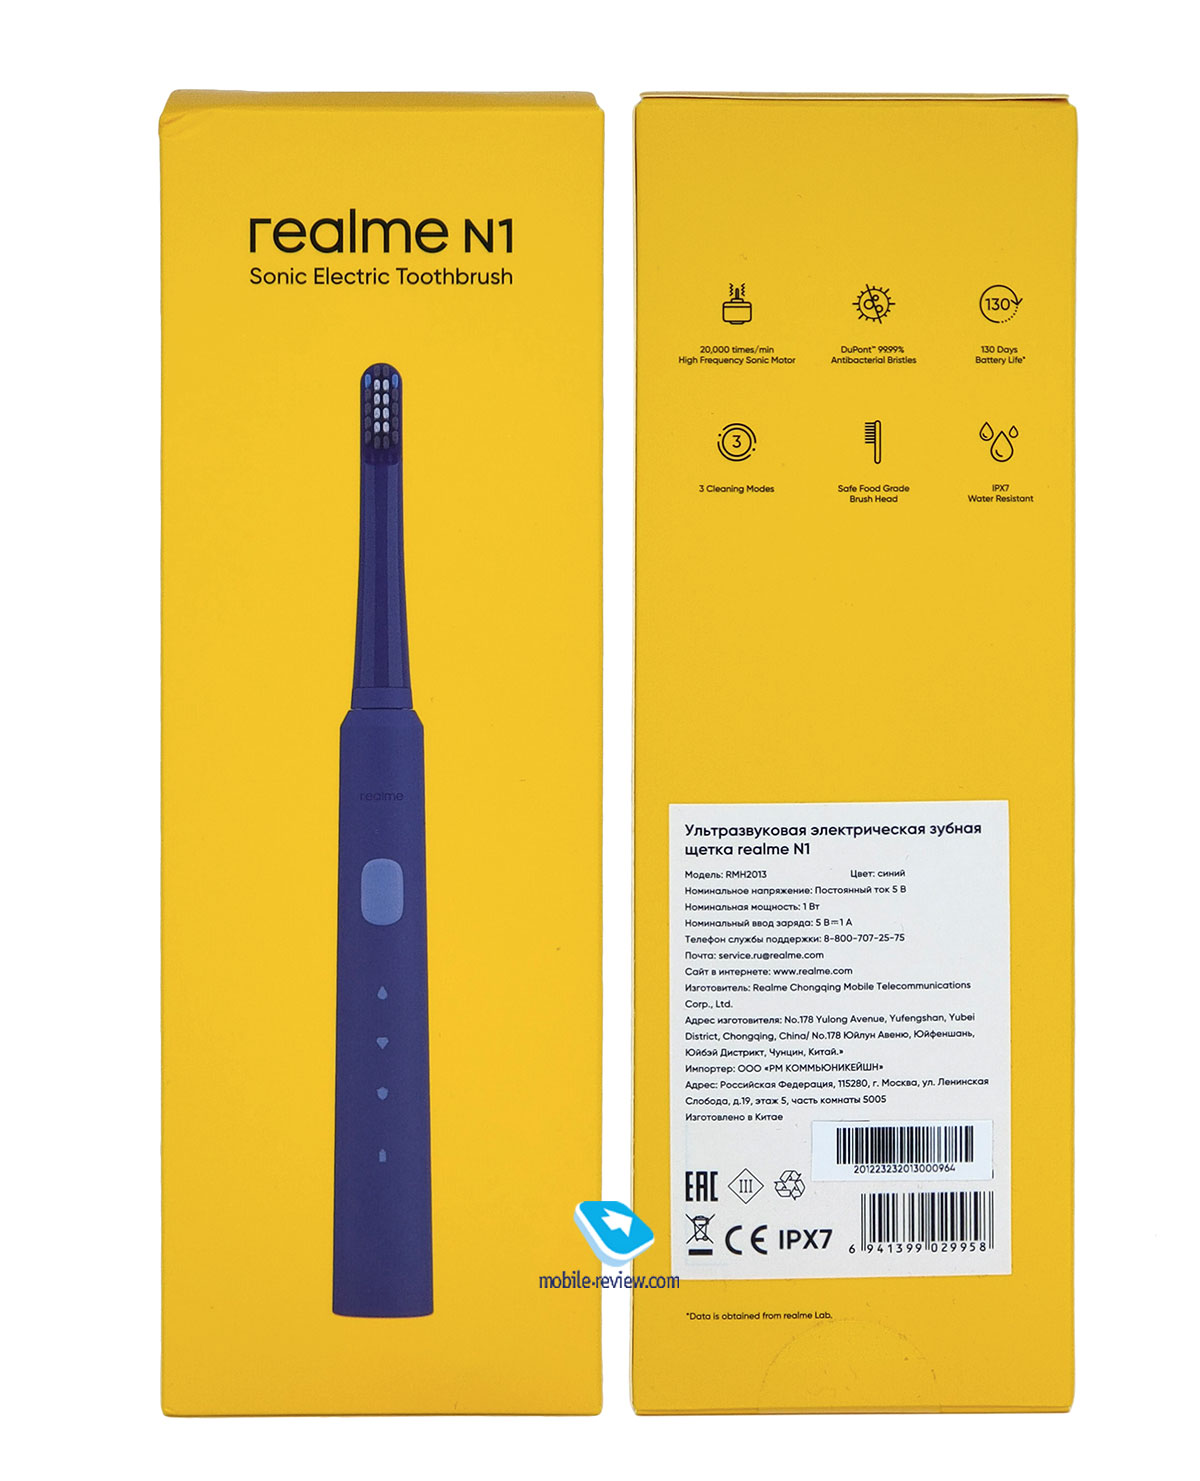 First look at the realme ecosystem